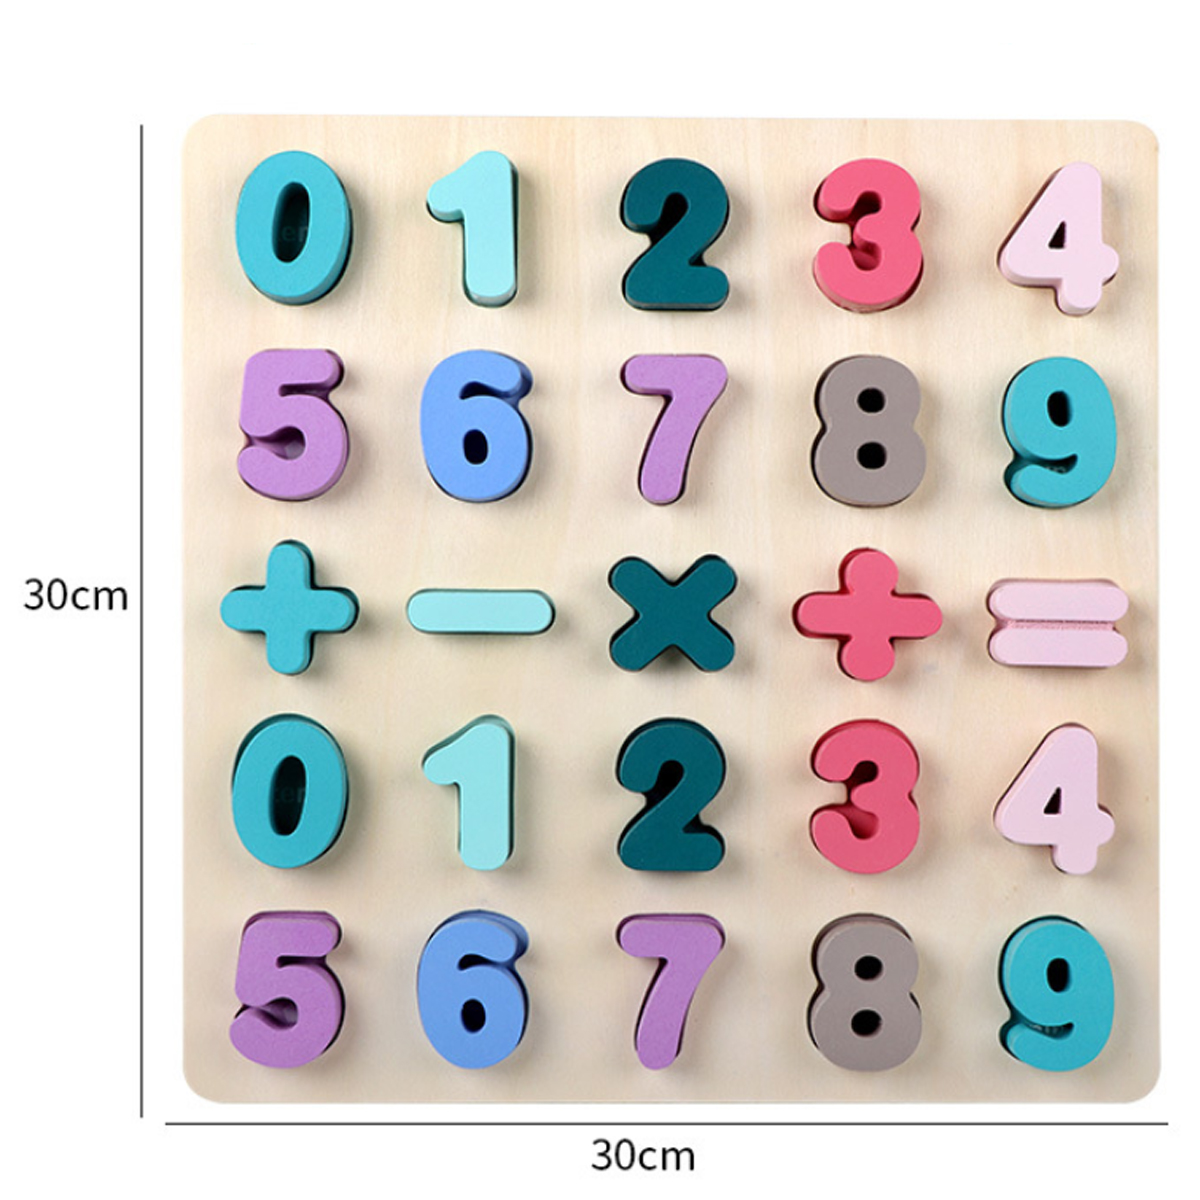 Alphanumeric-Board-Wooden-Jigsaw-Volume-Wooden-Baby-Young-Children-Early-Education-Educational-Toys-1635558-8